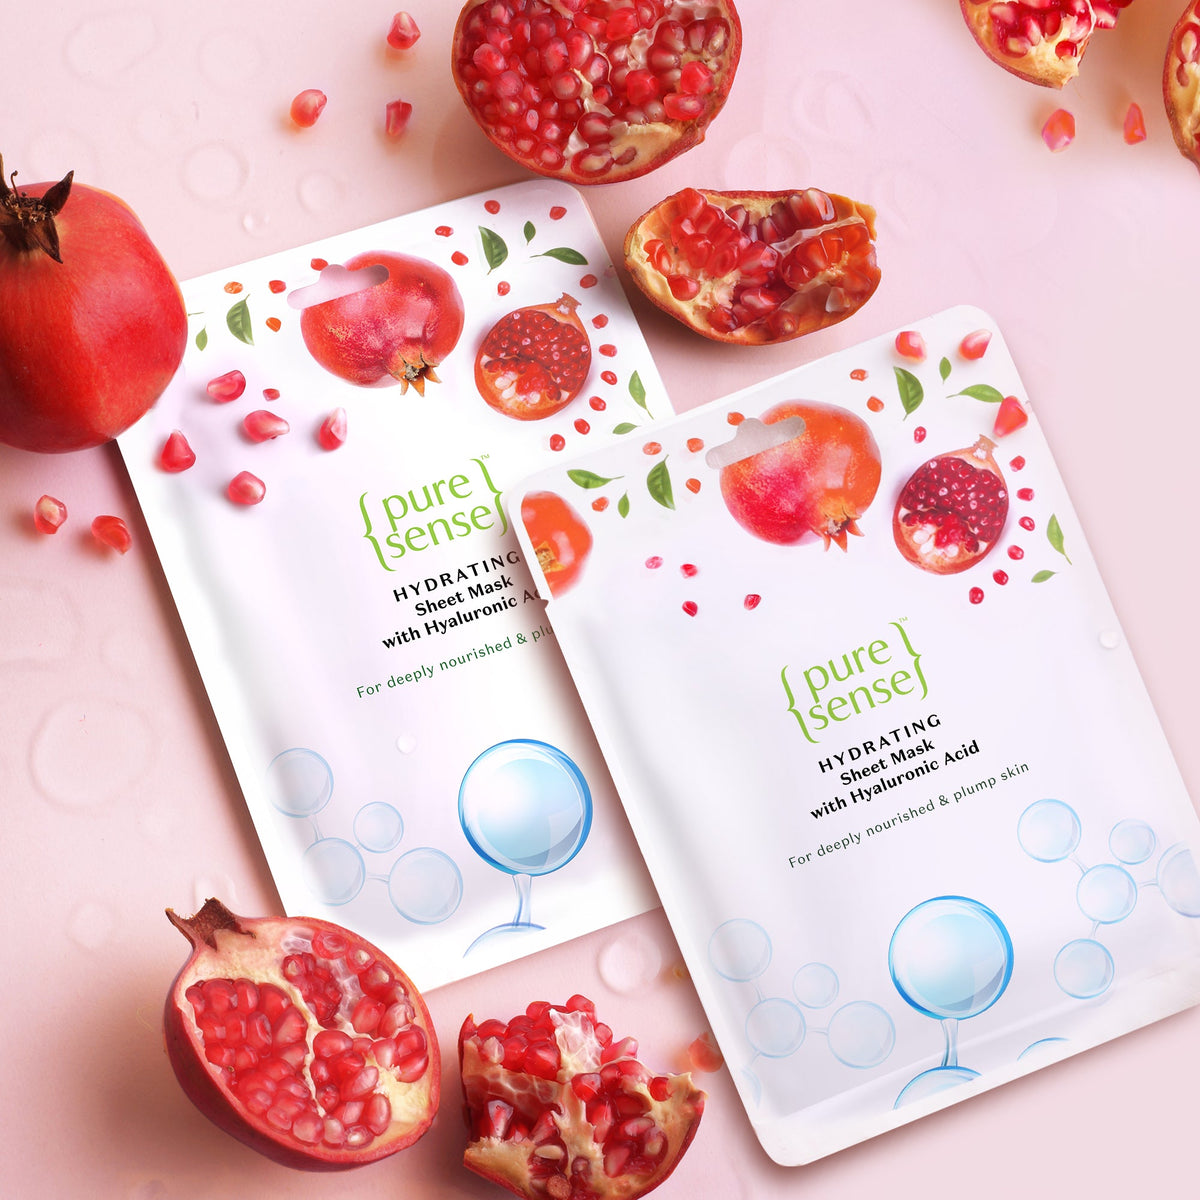 [CRED] Hydrating Sheet Mask with Hyaluronic Acid | From the makers of Parachute Advansed | 30ml